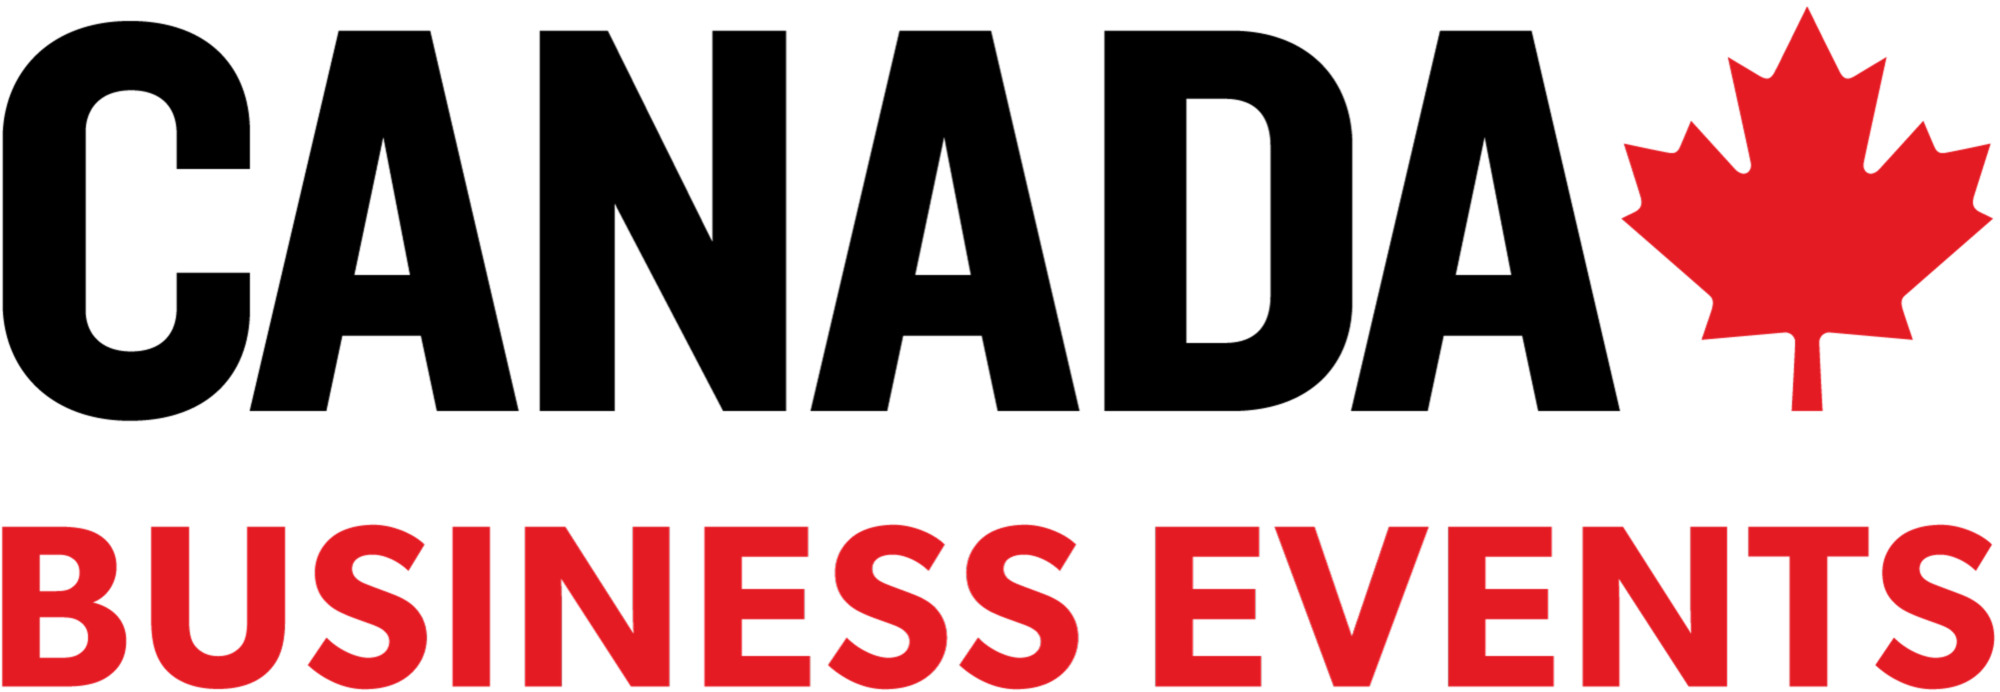 Business Events Canada